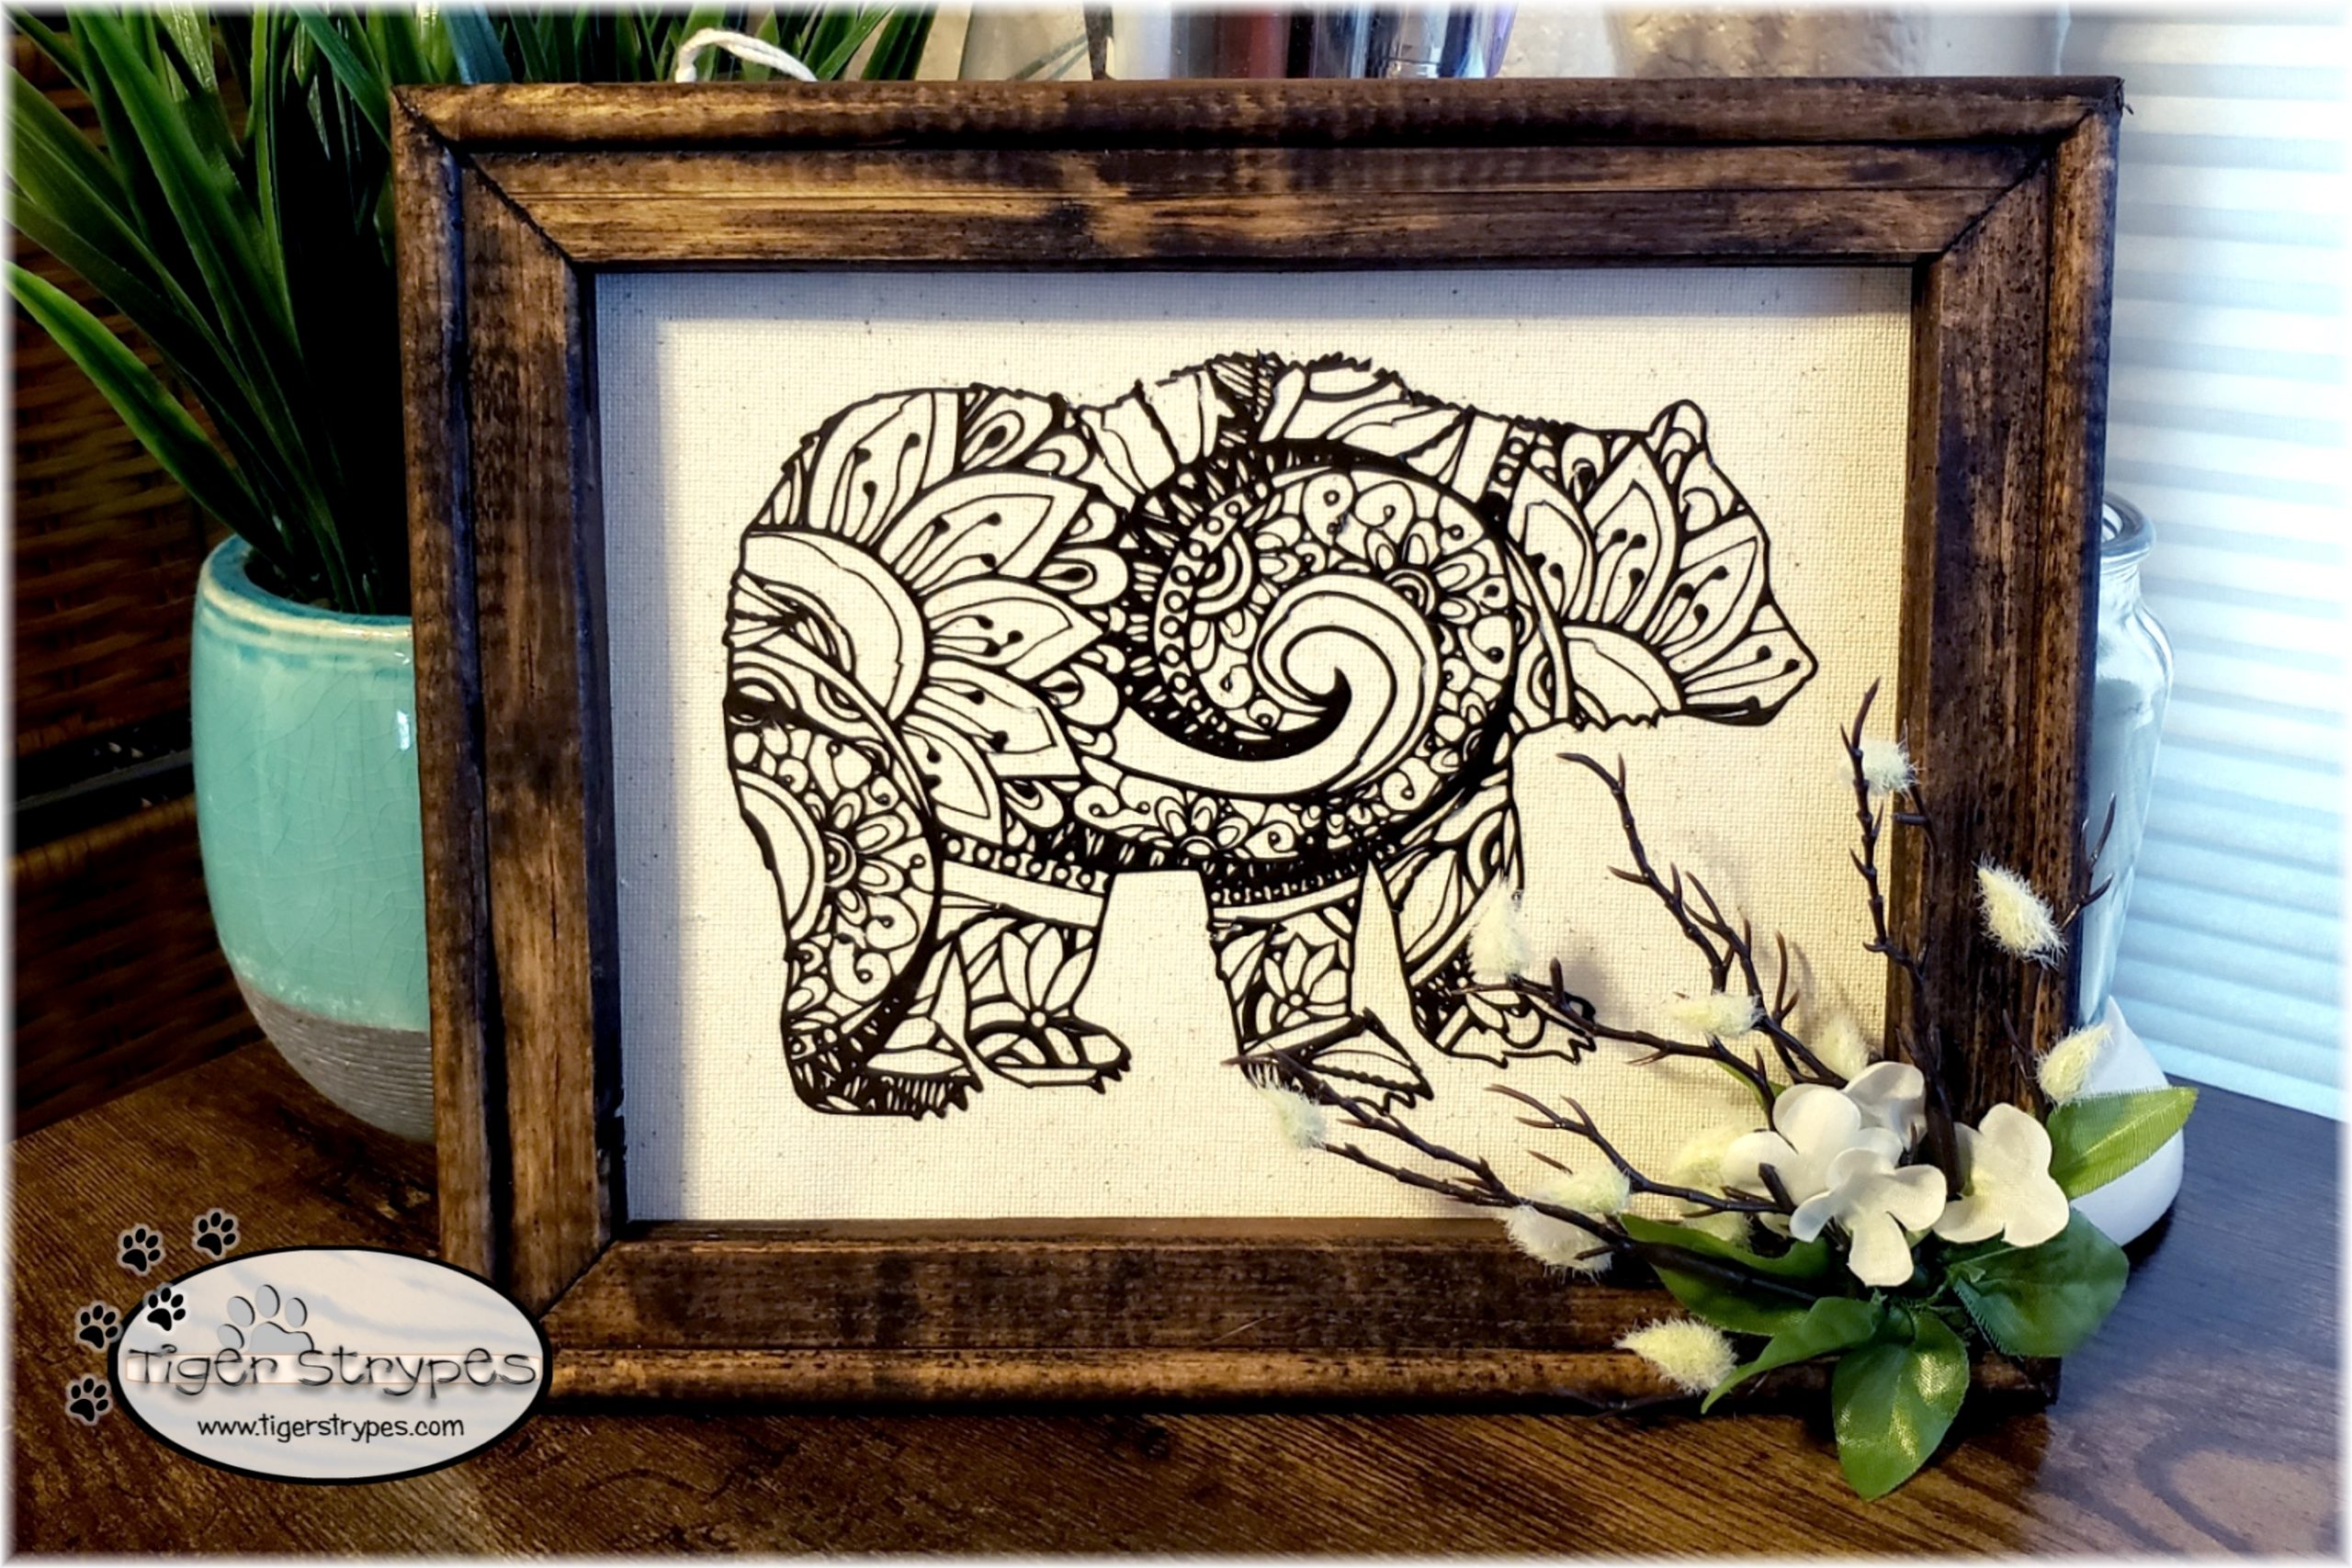 How to Make a Reverse Canvas: Easy & Inexpensive Framed Art!